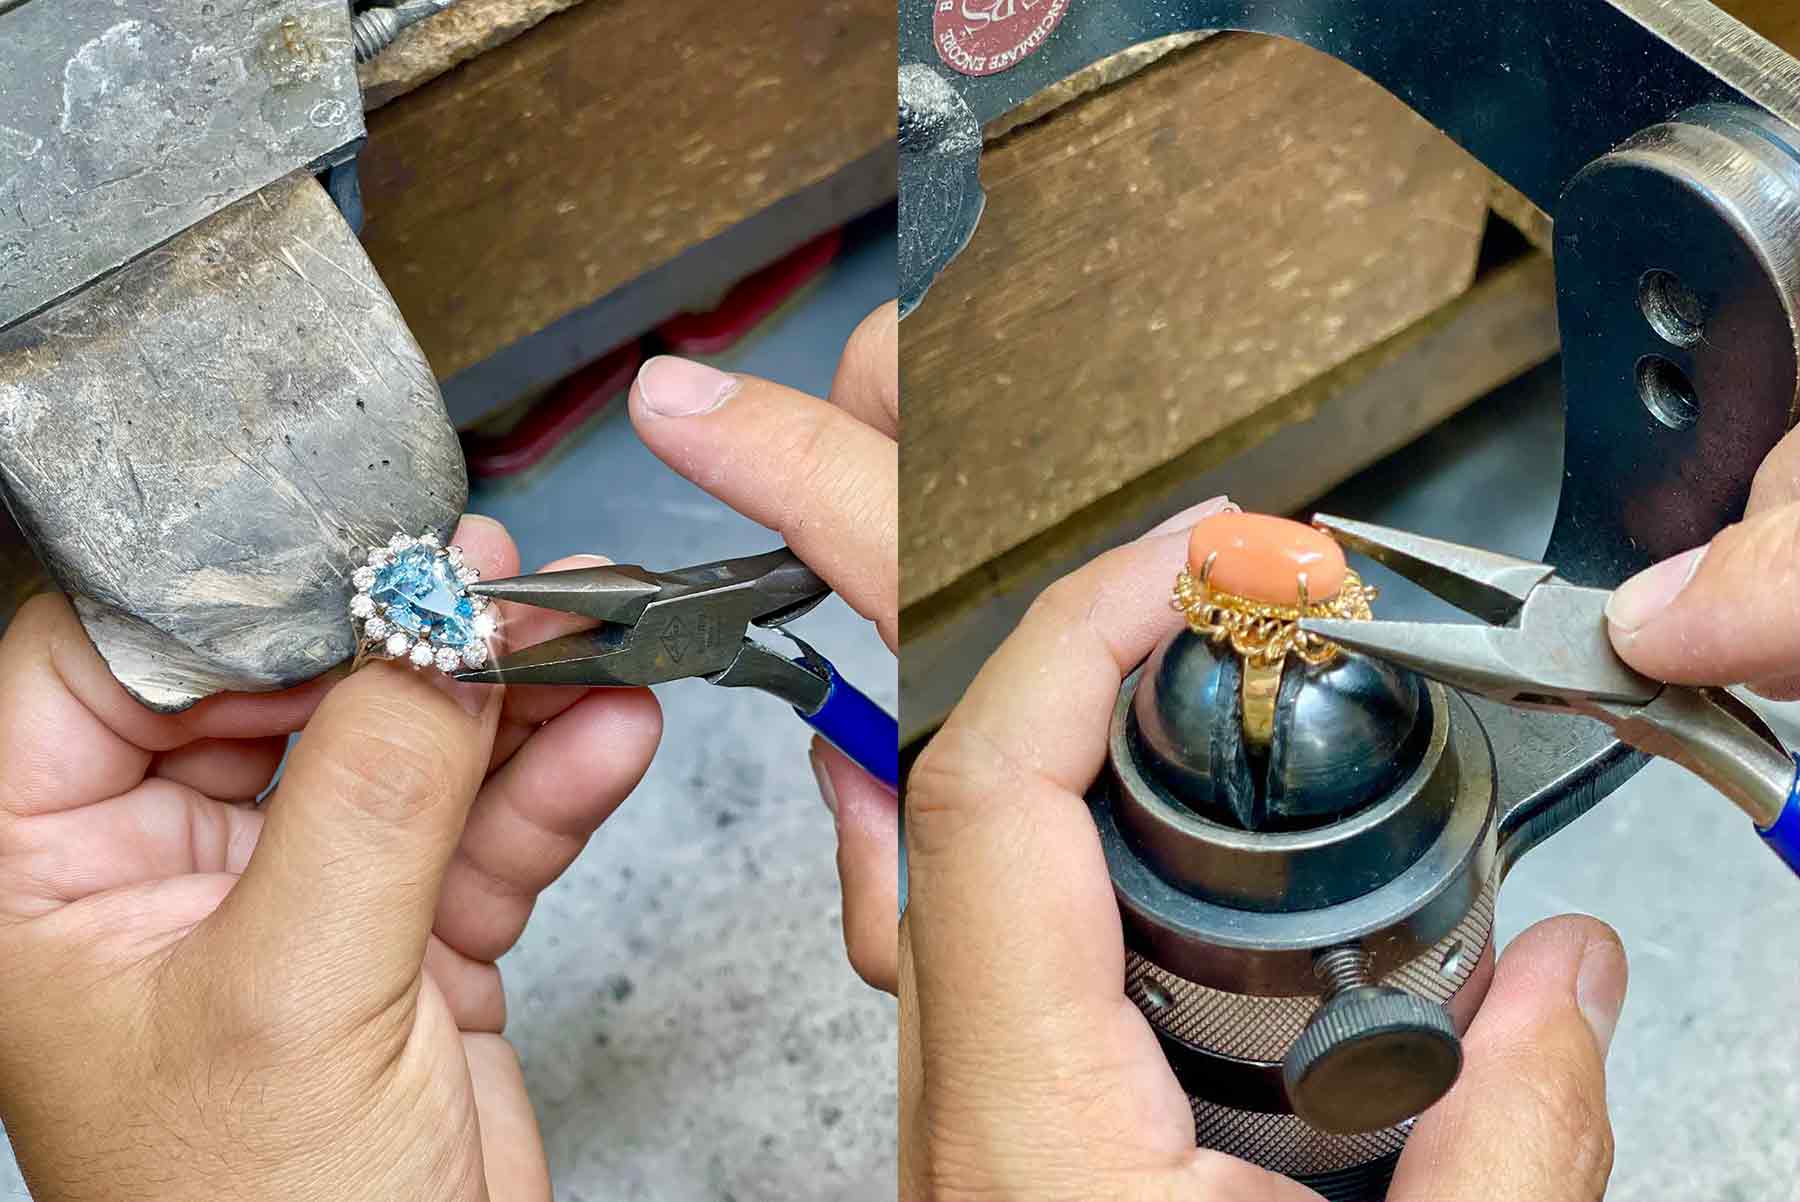 Securing Stones in blue stone ring and orange stone ring